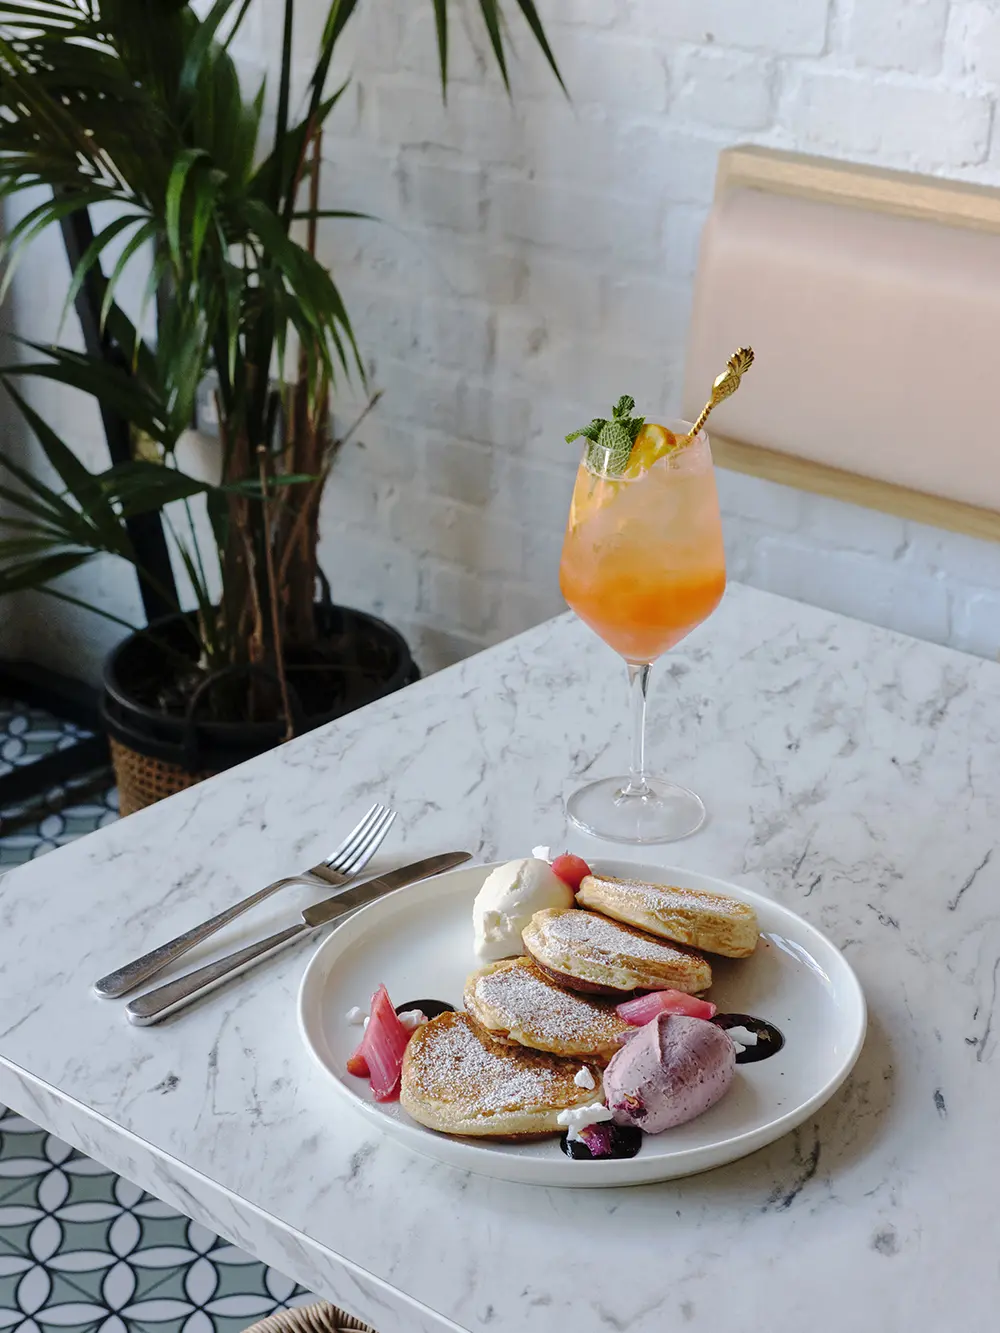 A plate of pancakes and a tropical drink in a cocktail glass with a straw